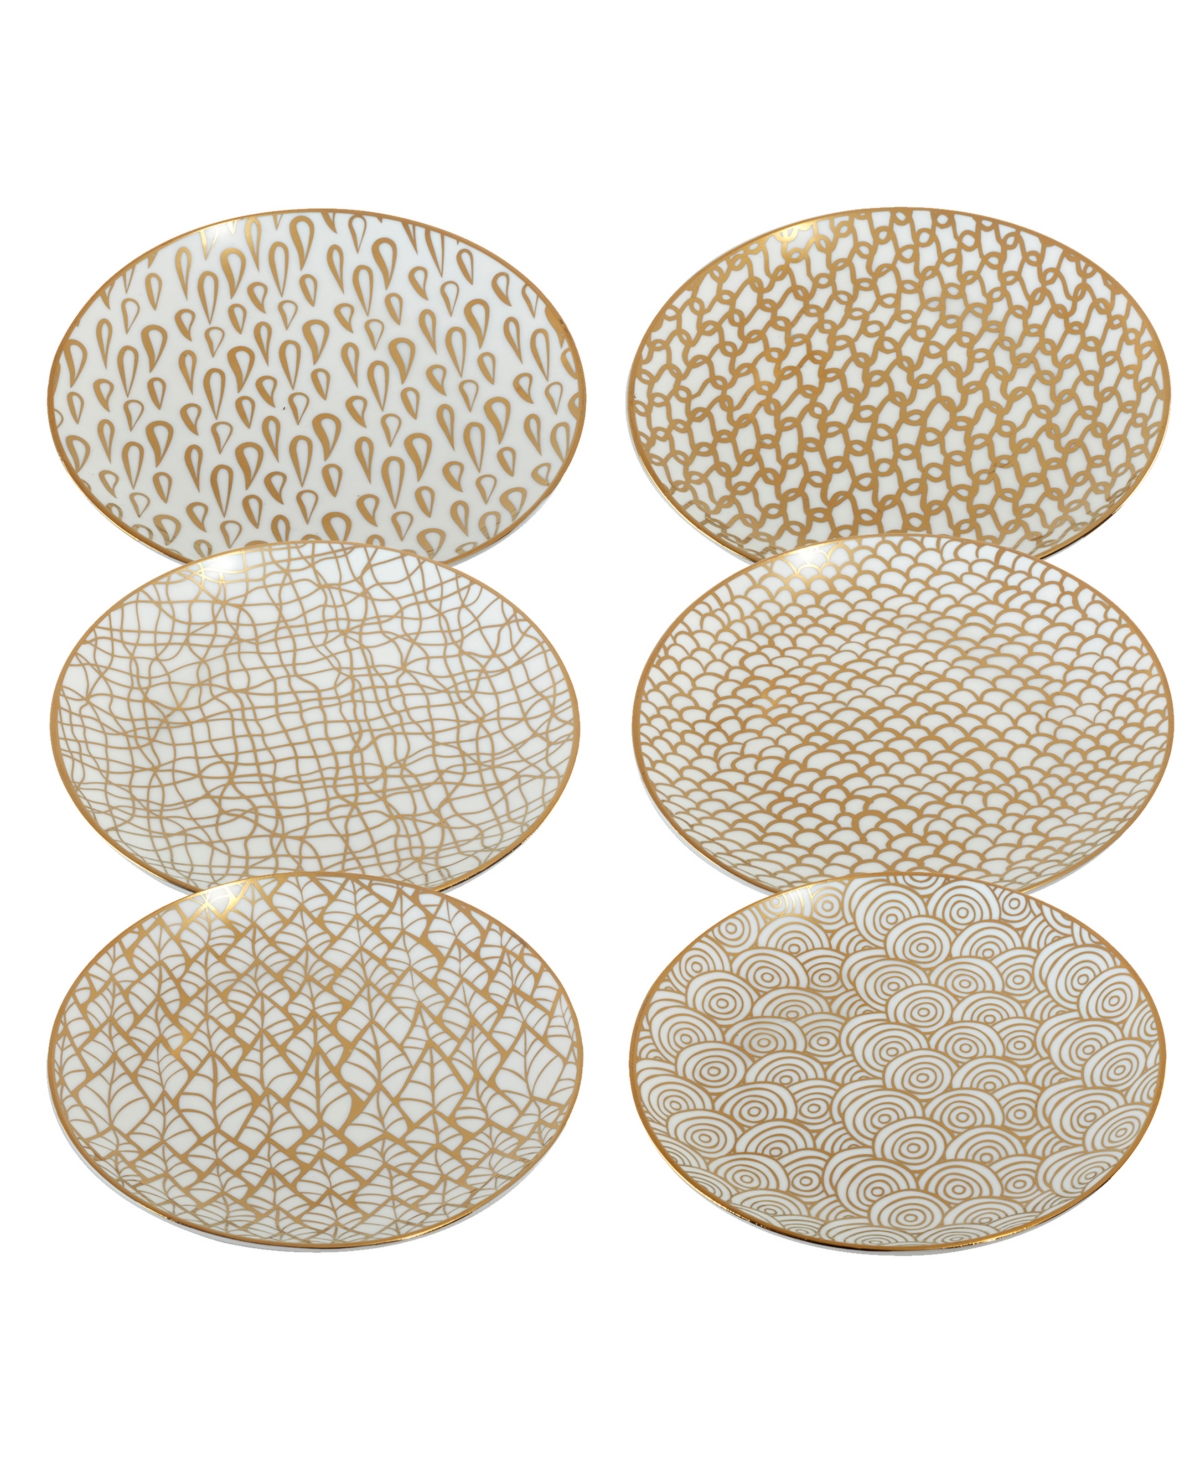 CERTIFIED INTERNATIONAL MOSAIC GOLD-TONE CANAPE PLATES SET OF 6, SERVICE FOR 6